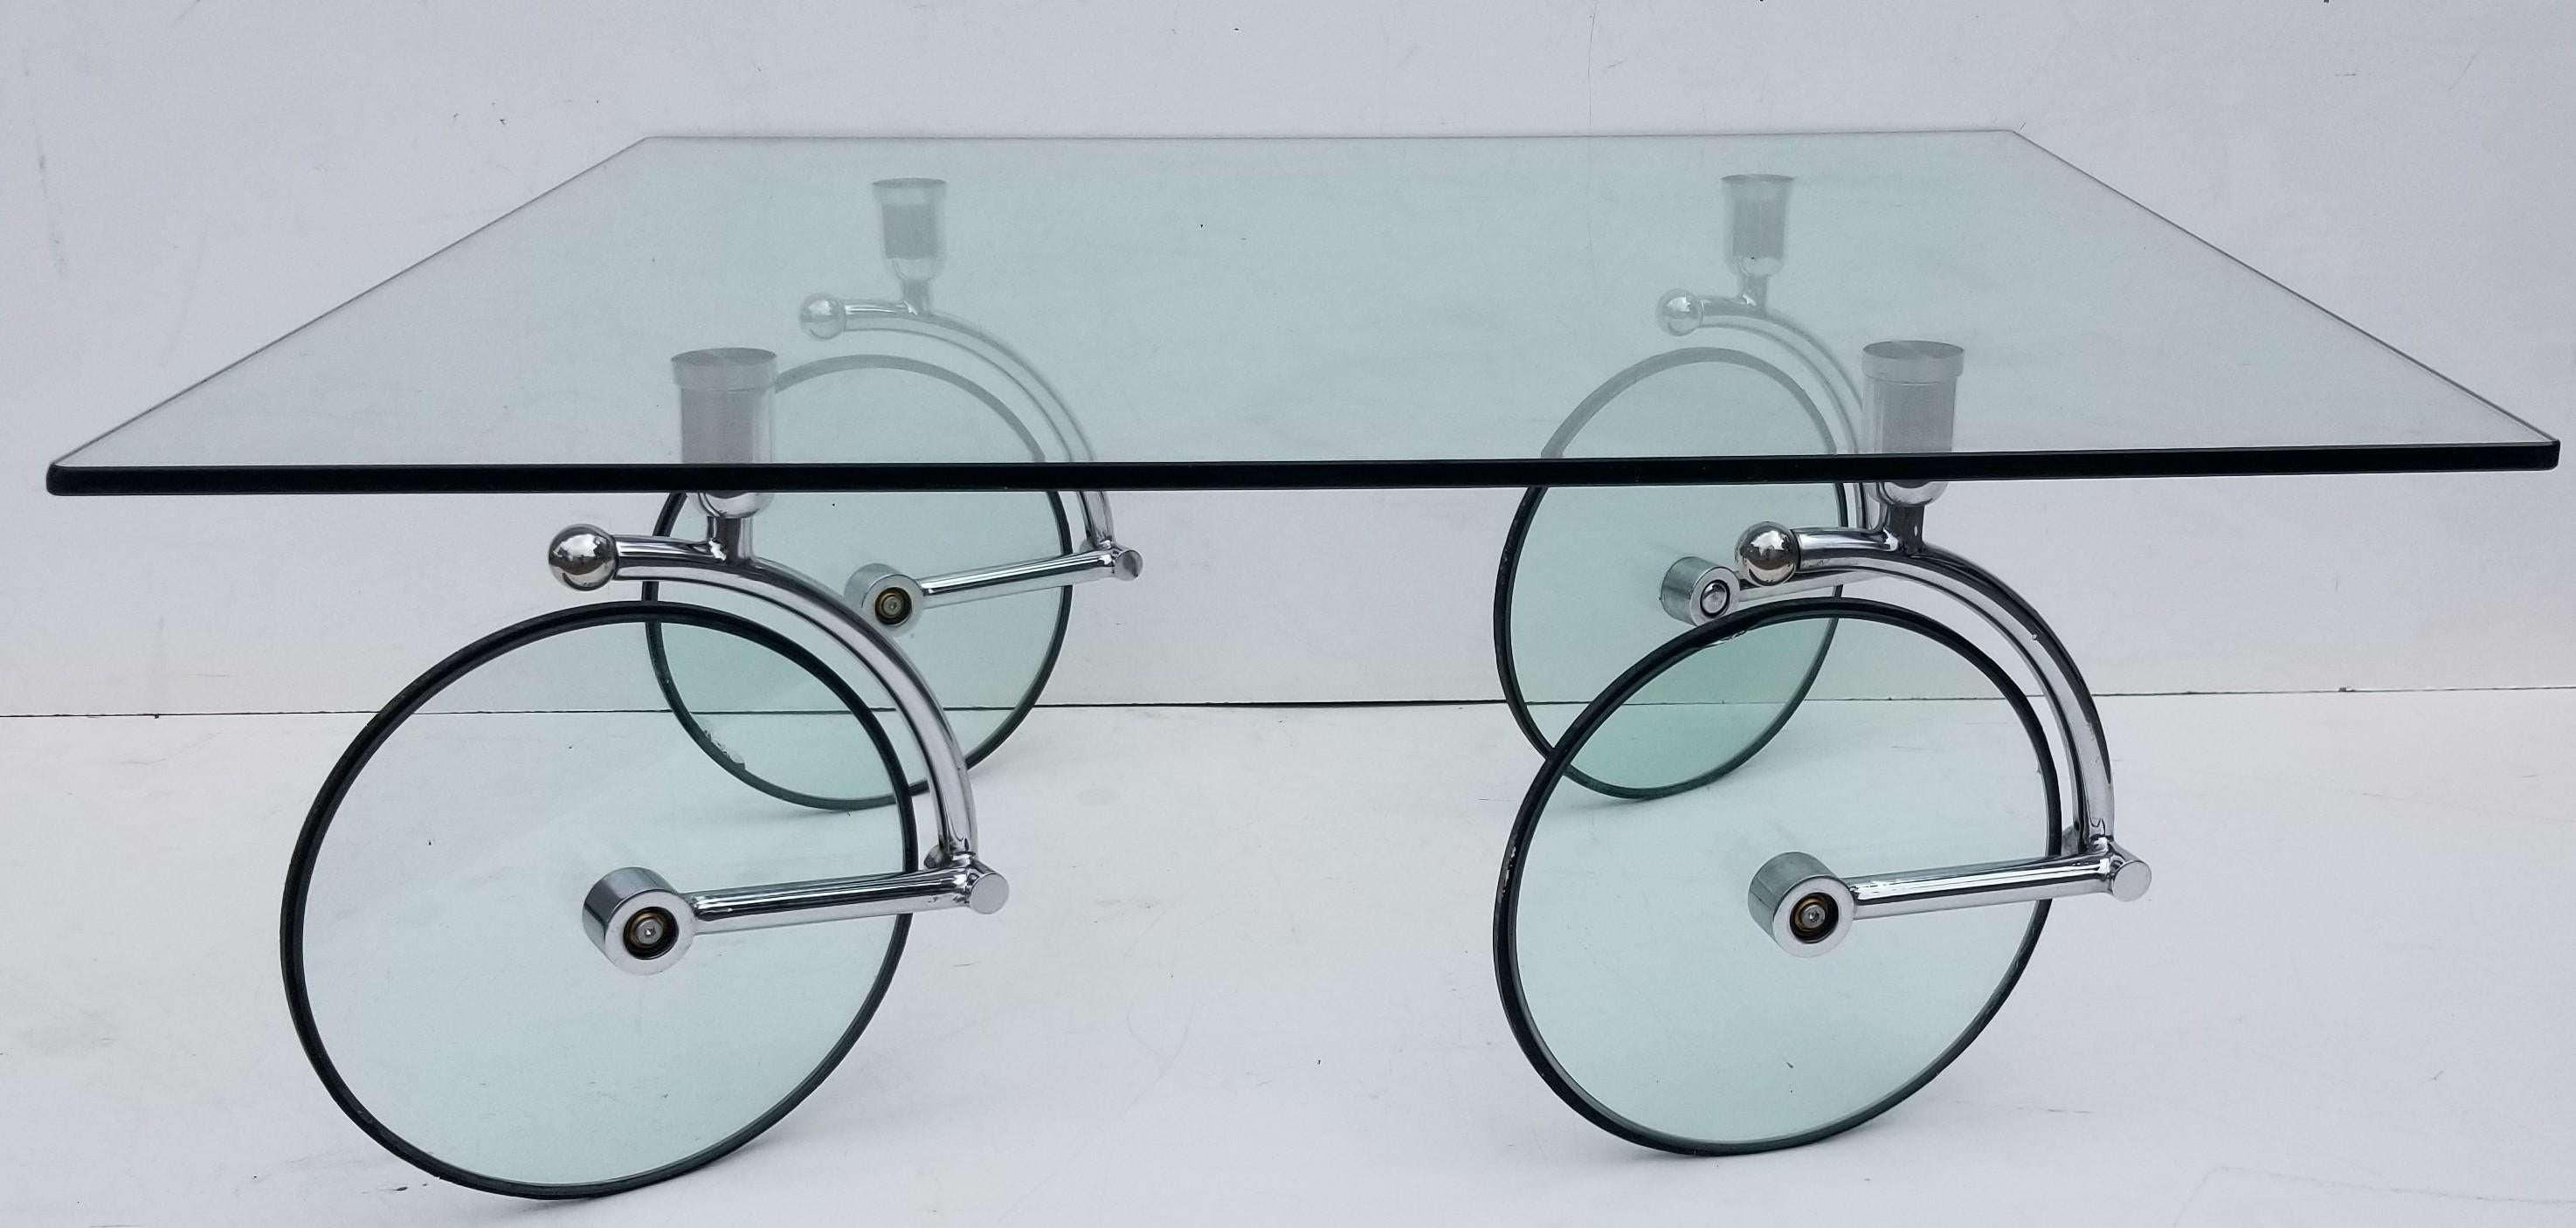 Fontana Arte 1970 midcentury glass and chrome coffee table
4 large wheels holding a large square glass top.